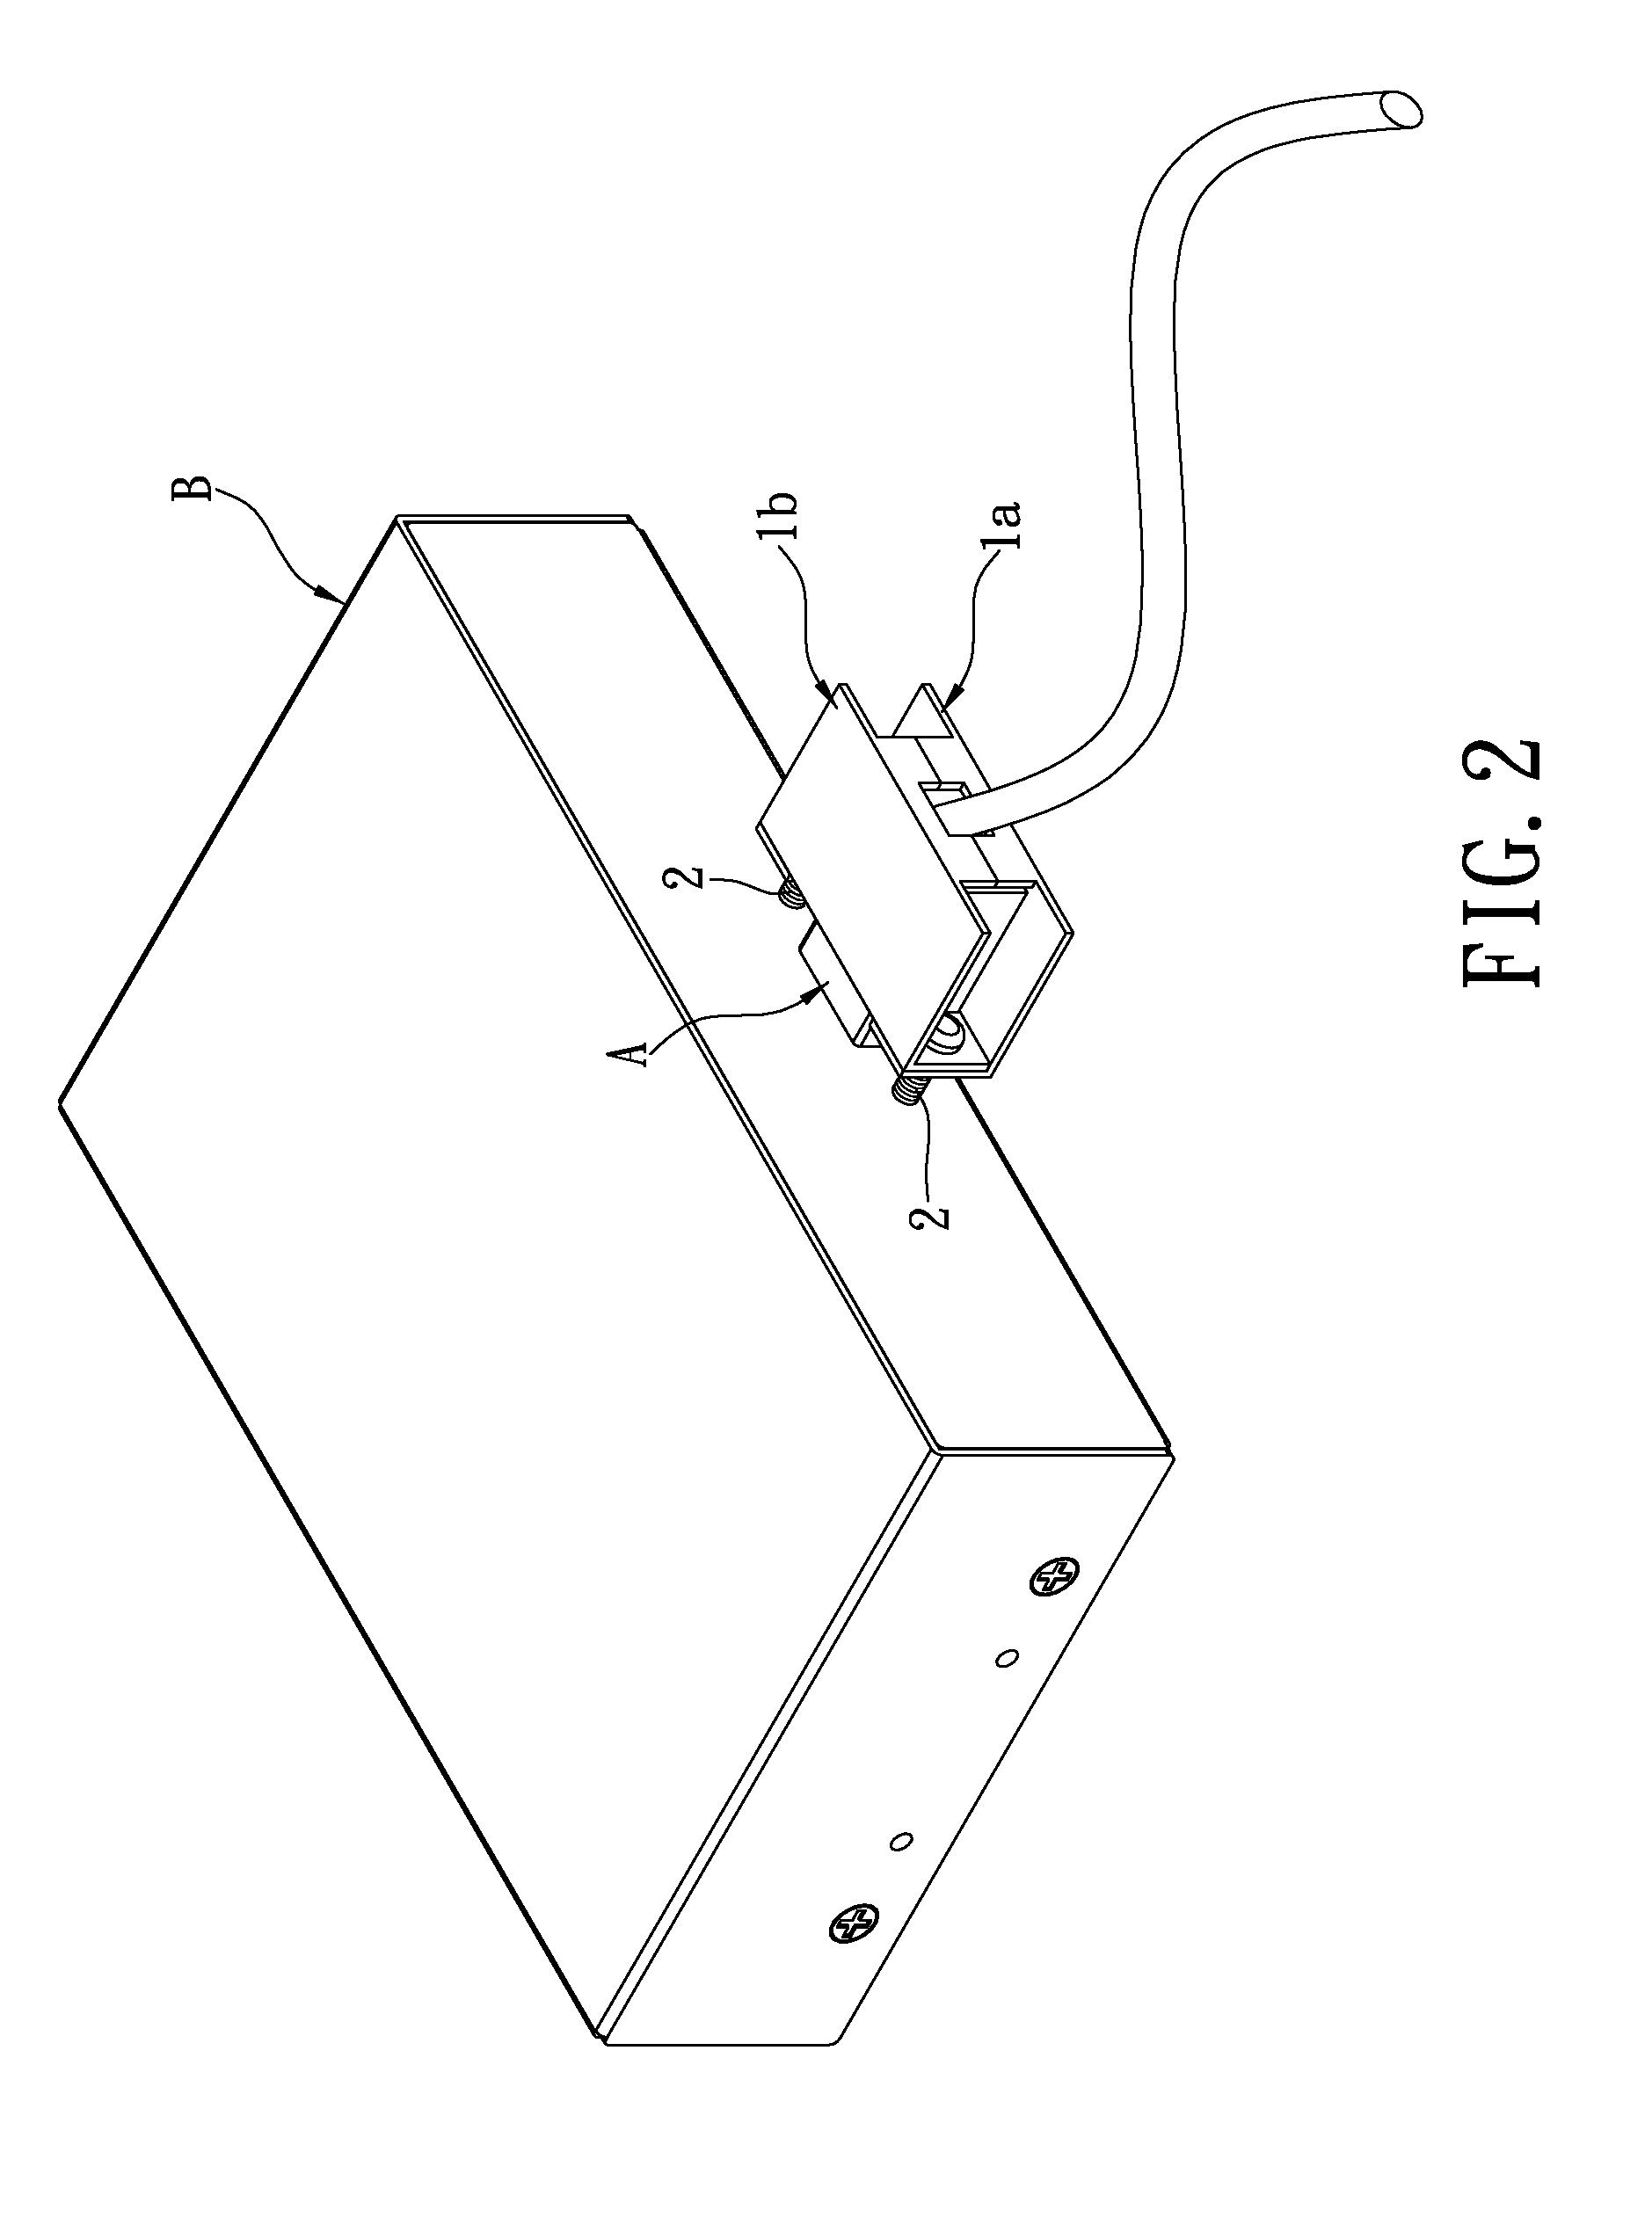 Connector retaining device